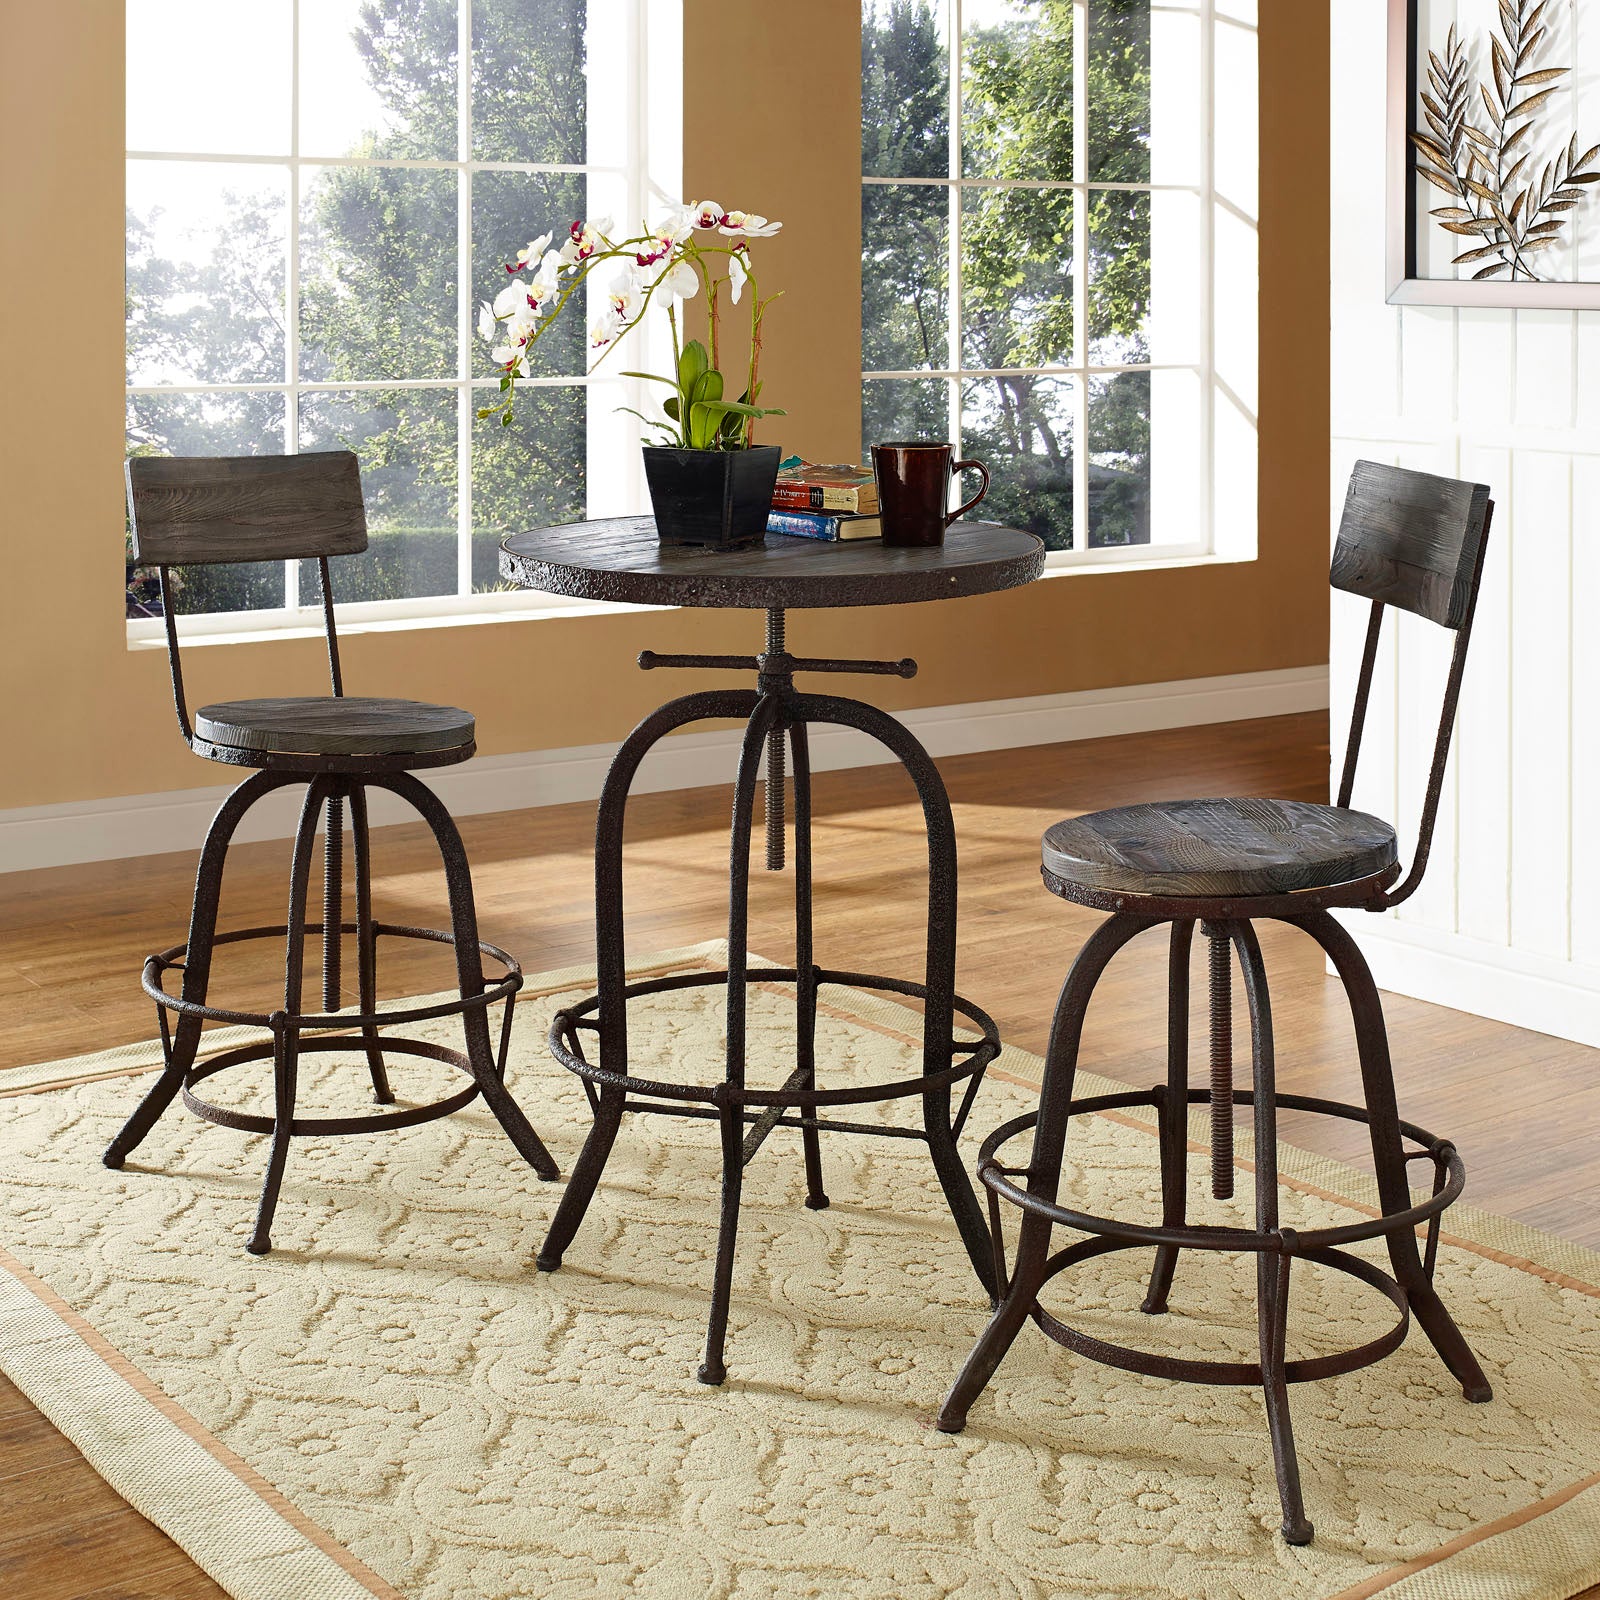 Gather 3 Piece Dining Set - East Shore Modern Home Furnishings